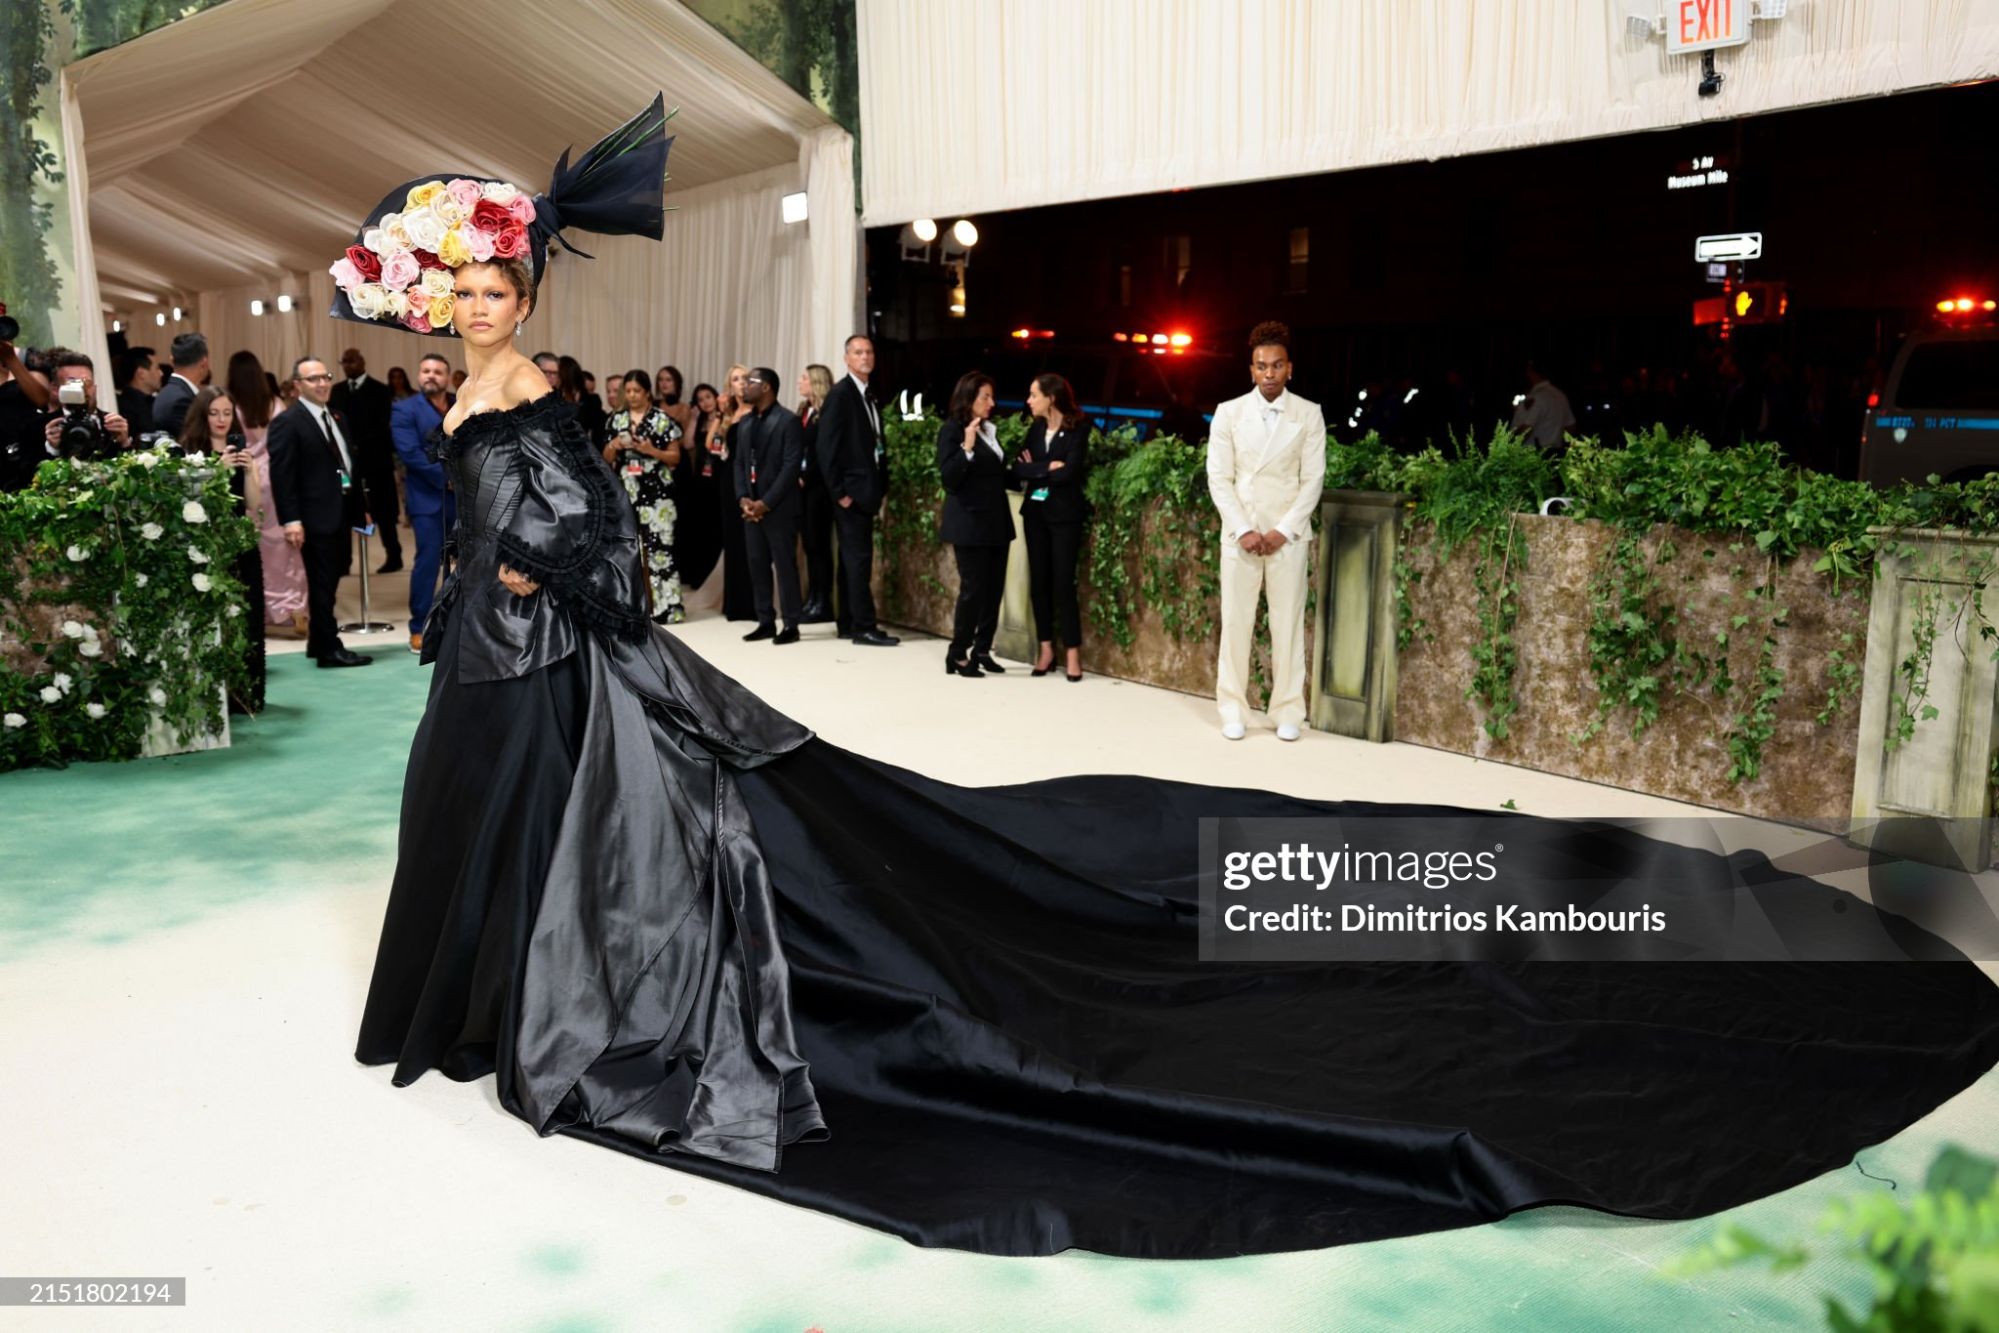 gettyimages-2151802194-2048x2048.jpg